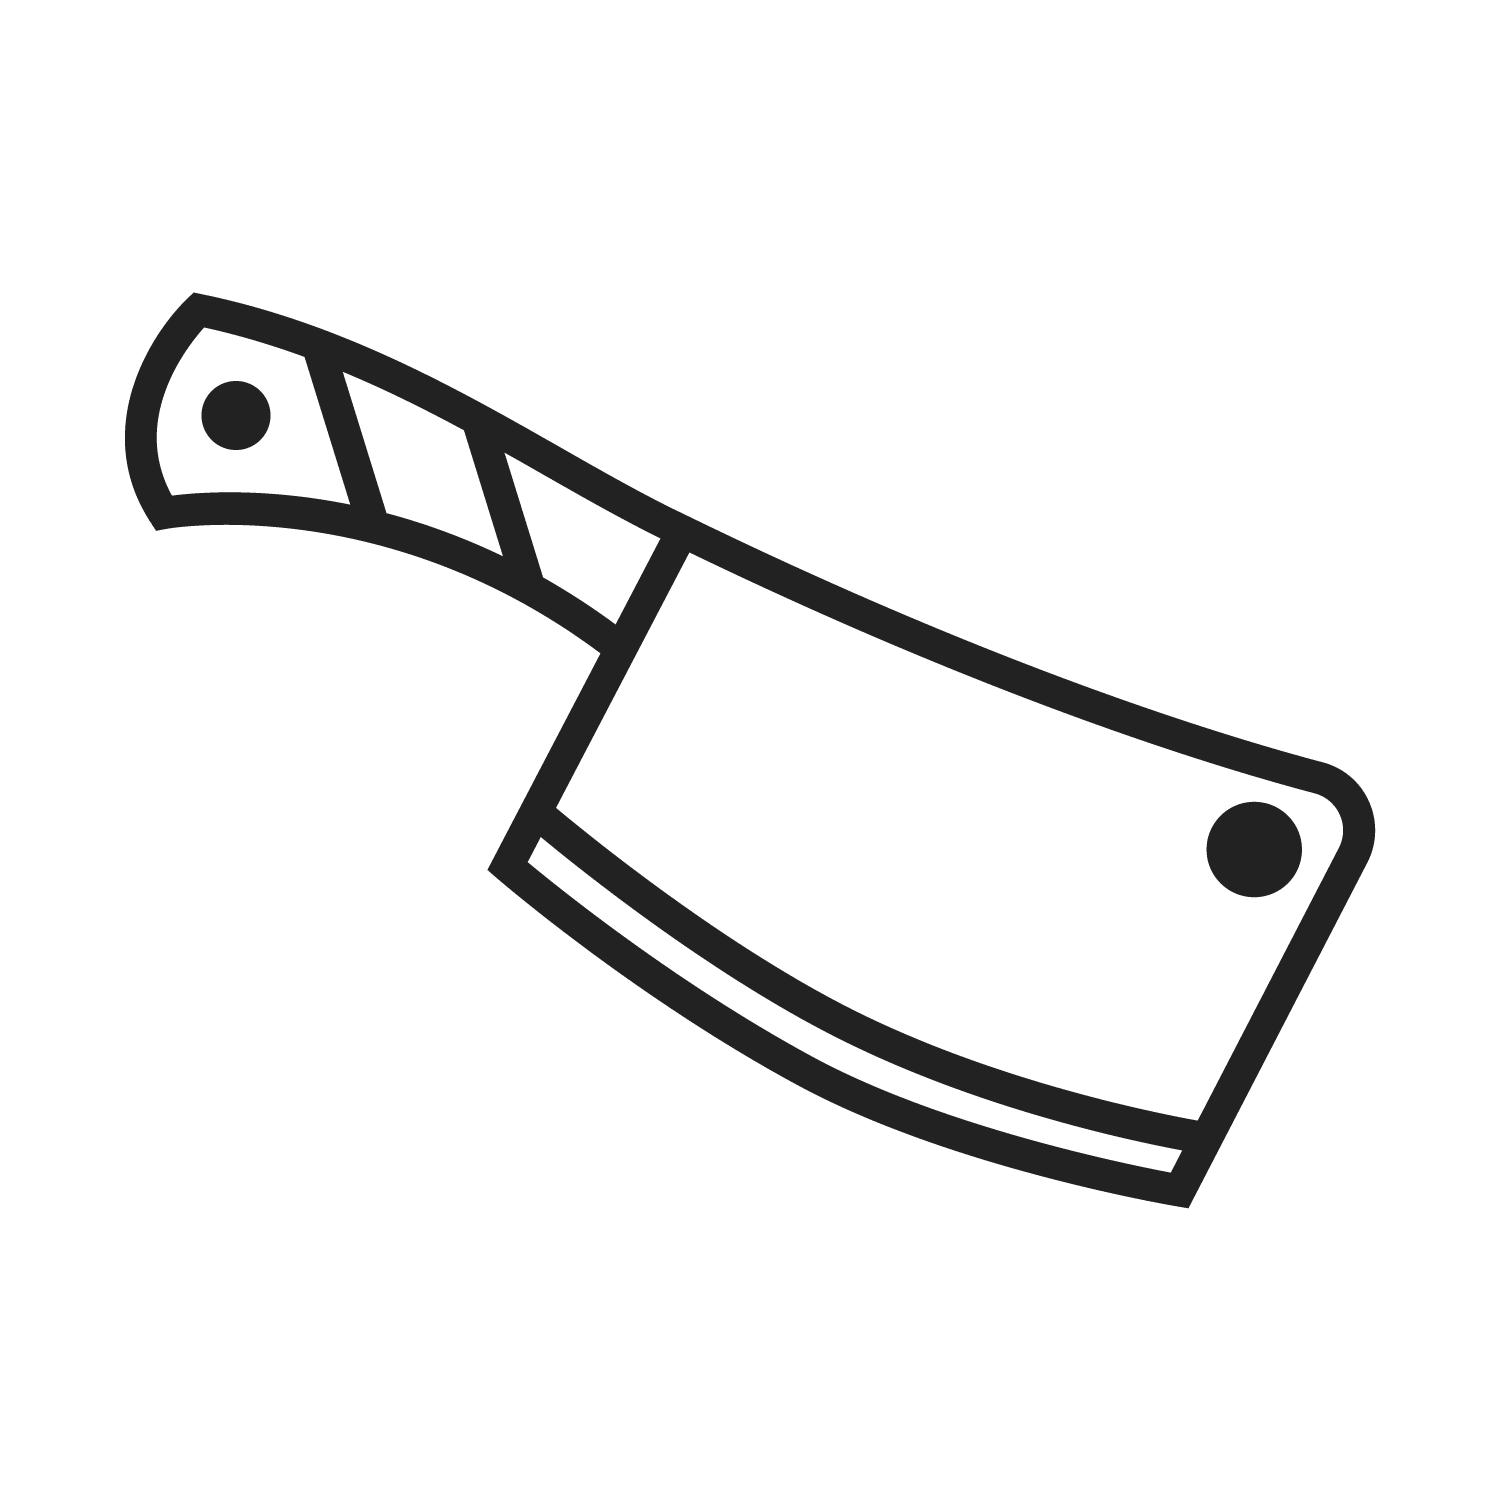 Outdoorempire icons2021 cleaver 24